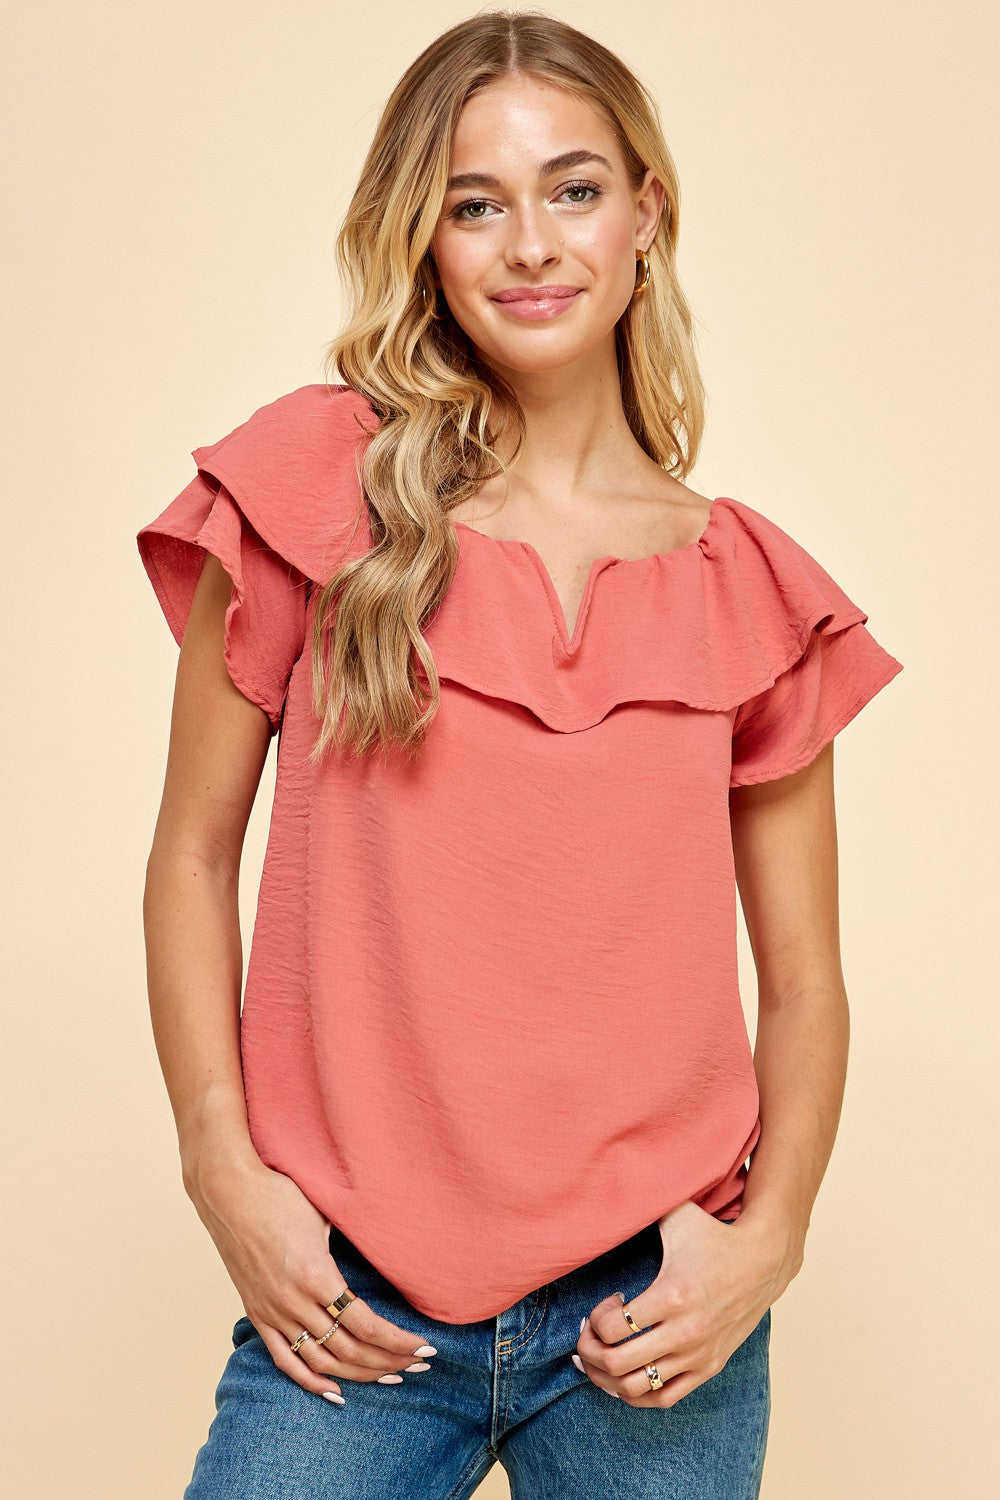 Coral Solid Top with Ruffle Sleeves from Les Amis Fashion